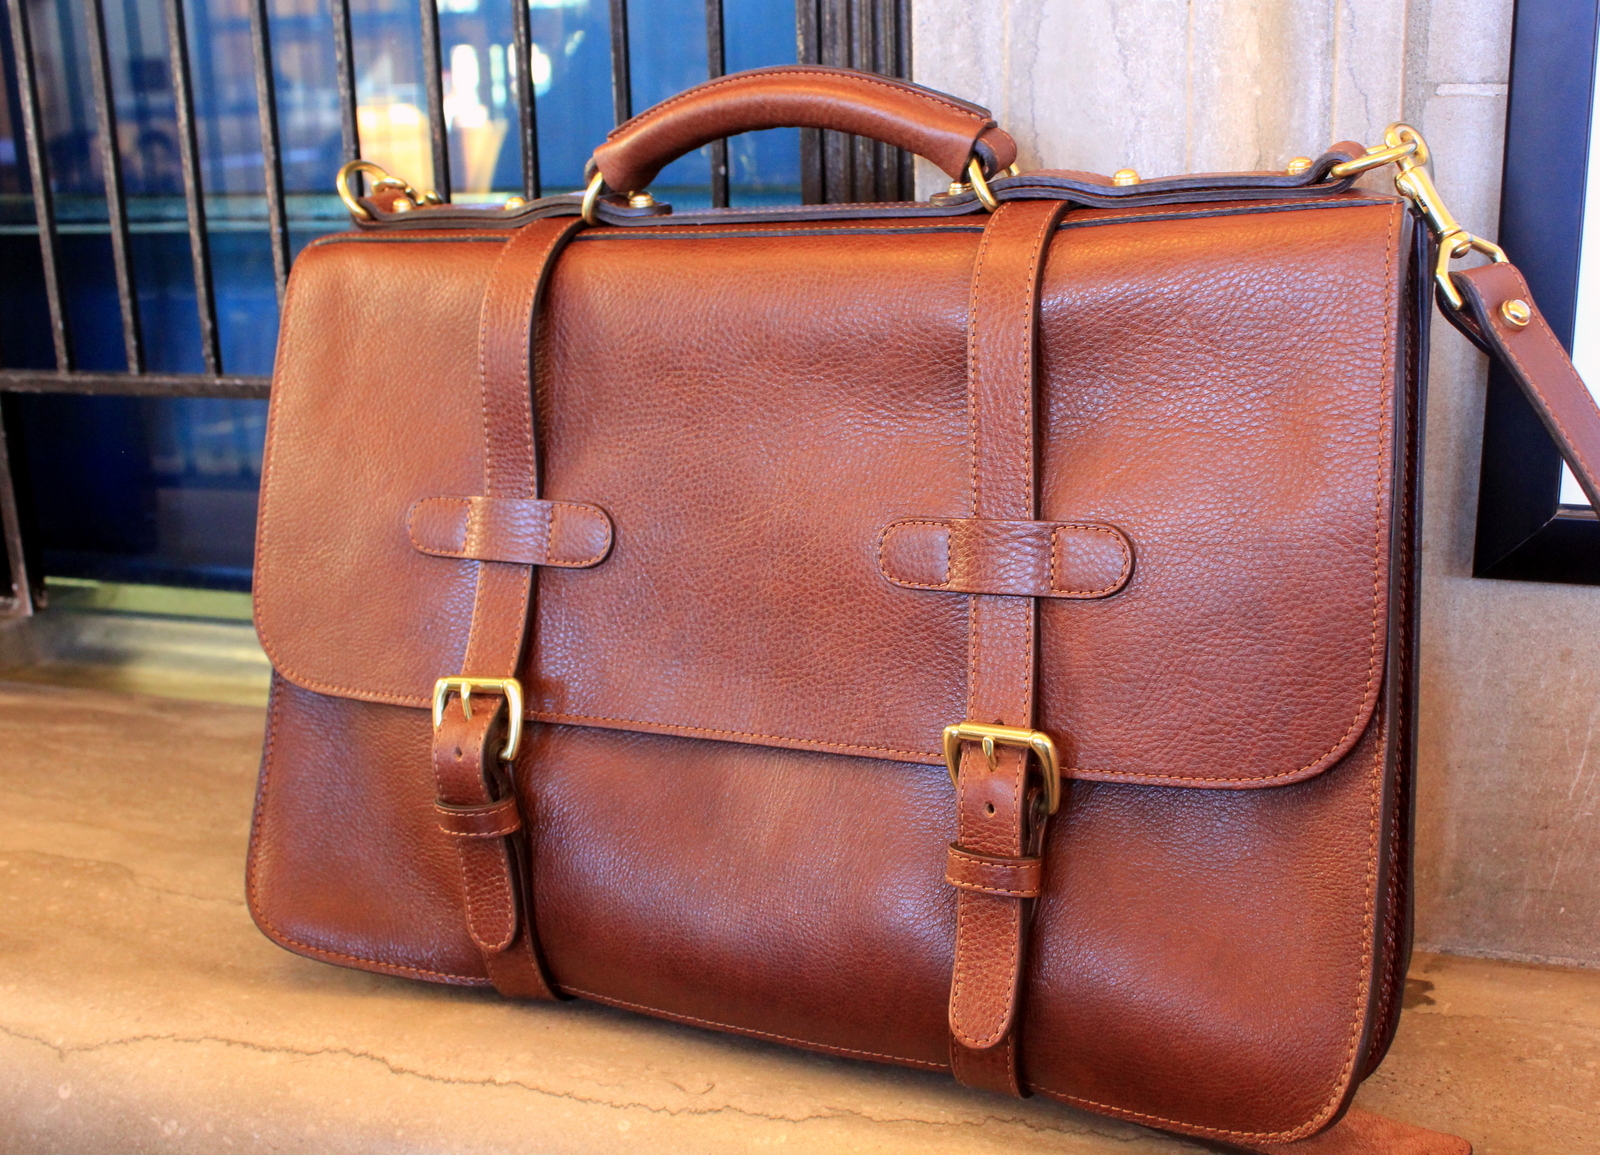 Salt Water New England: The Lotuff English Leather Briefcase